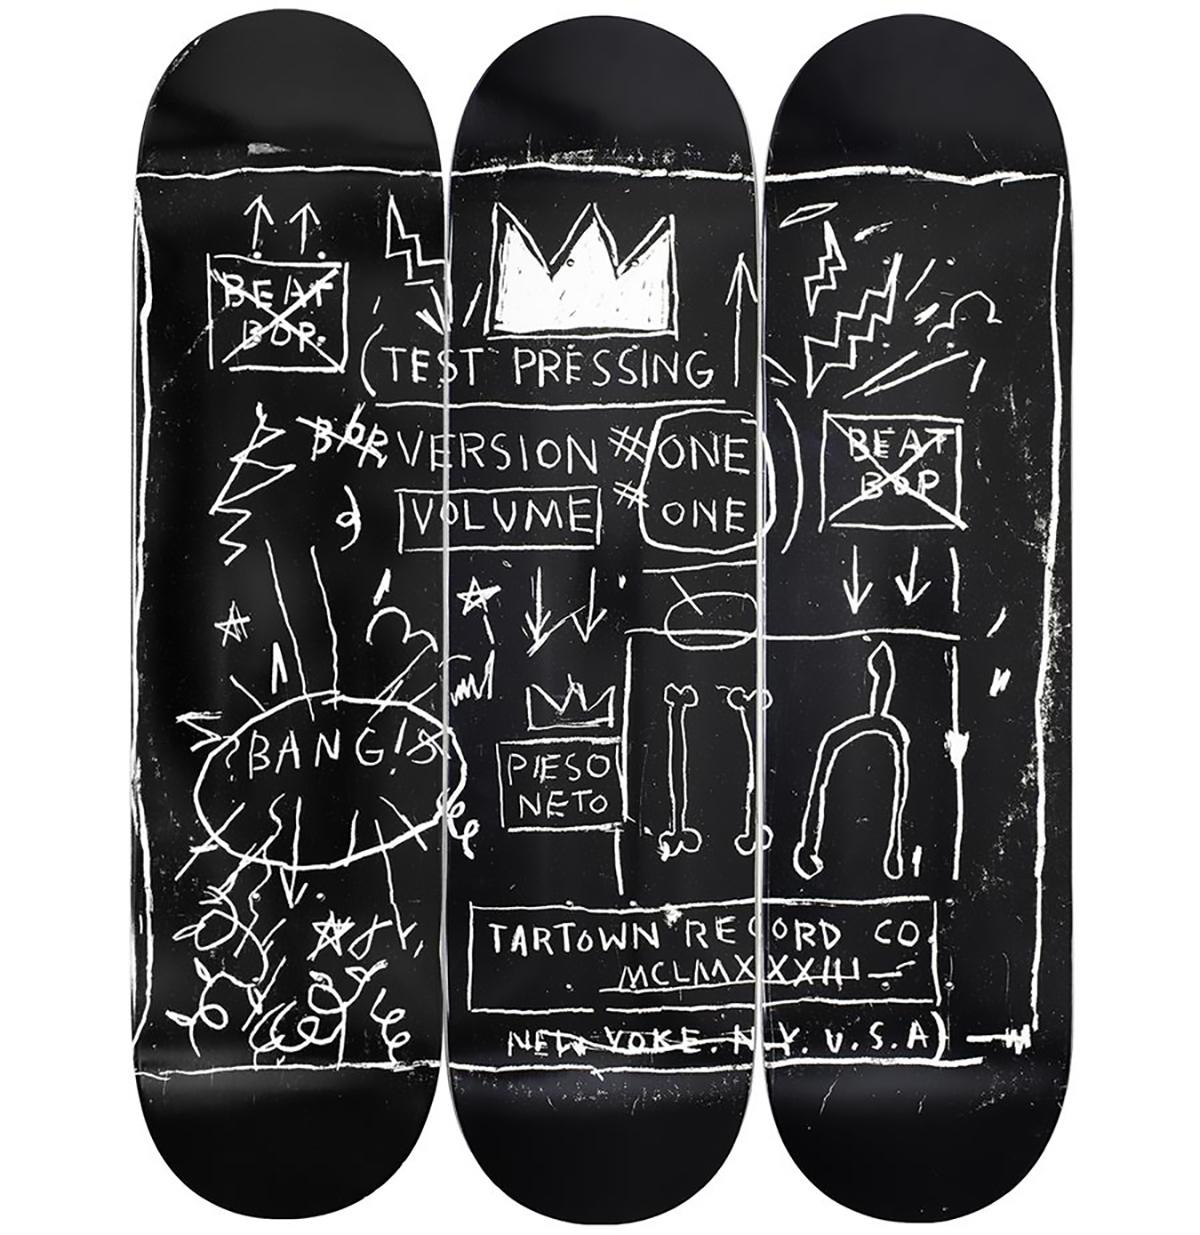 Jean-Michel Basquiat Beat Bop Skateboard Decks (set of 3):
Jean-Michel Basquiat Skateboard Deck Triptych licensed by the Estate of Jean Michel Basquiat in conjunction with Artestar/Rome Pays Off, featuring brilliantly rendered imagery of the much